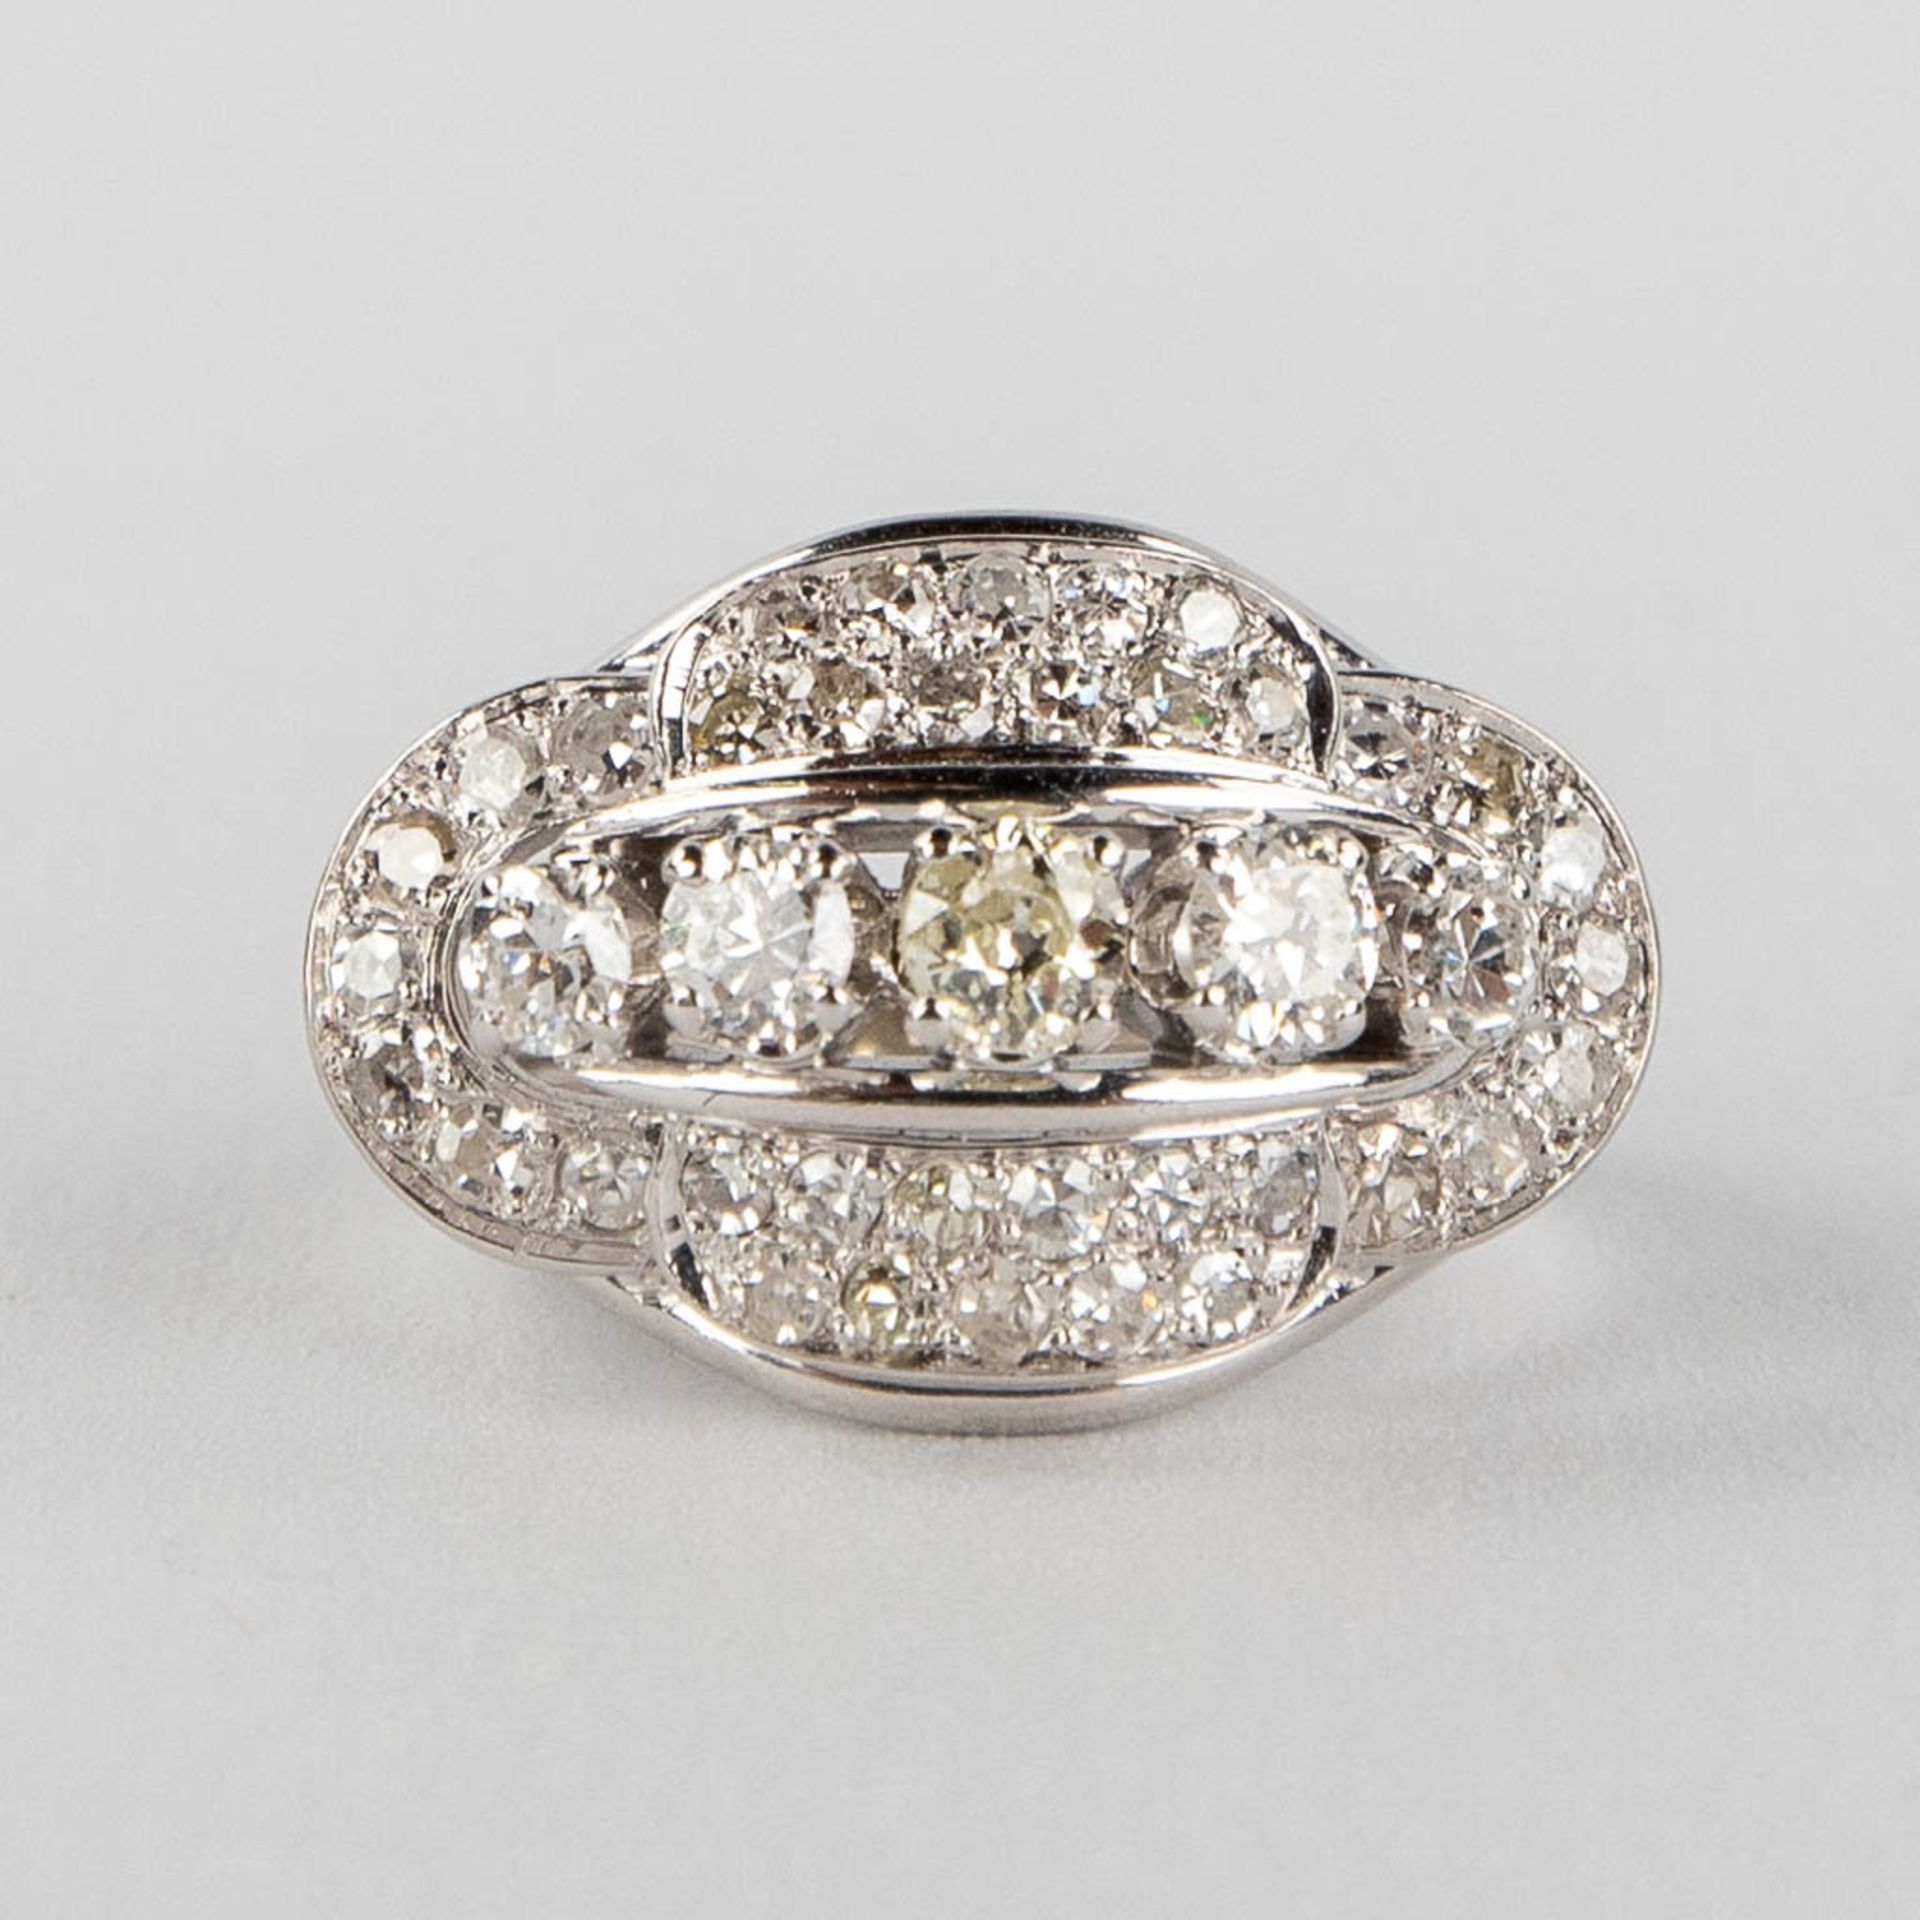 An antique ring with 5 larger and 36 smaller brilliants, in a platinum ring. 9,57g. size: 53